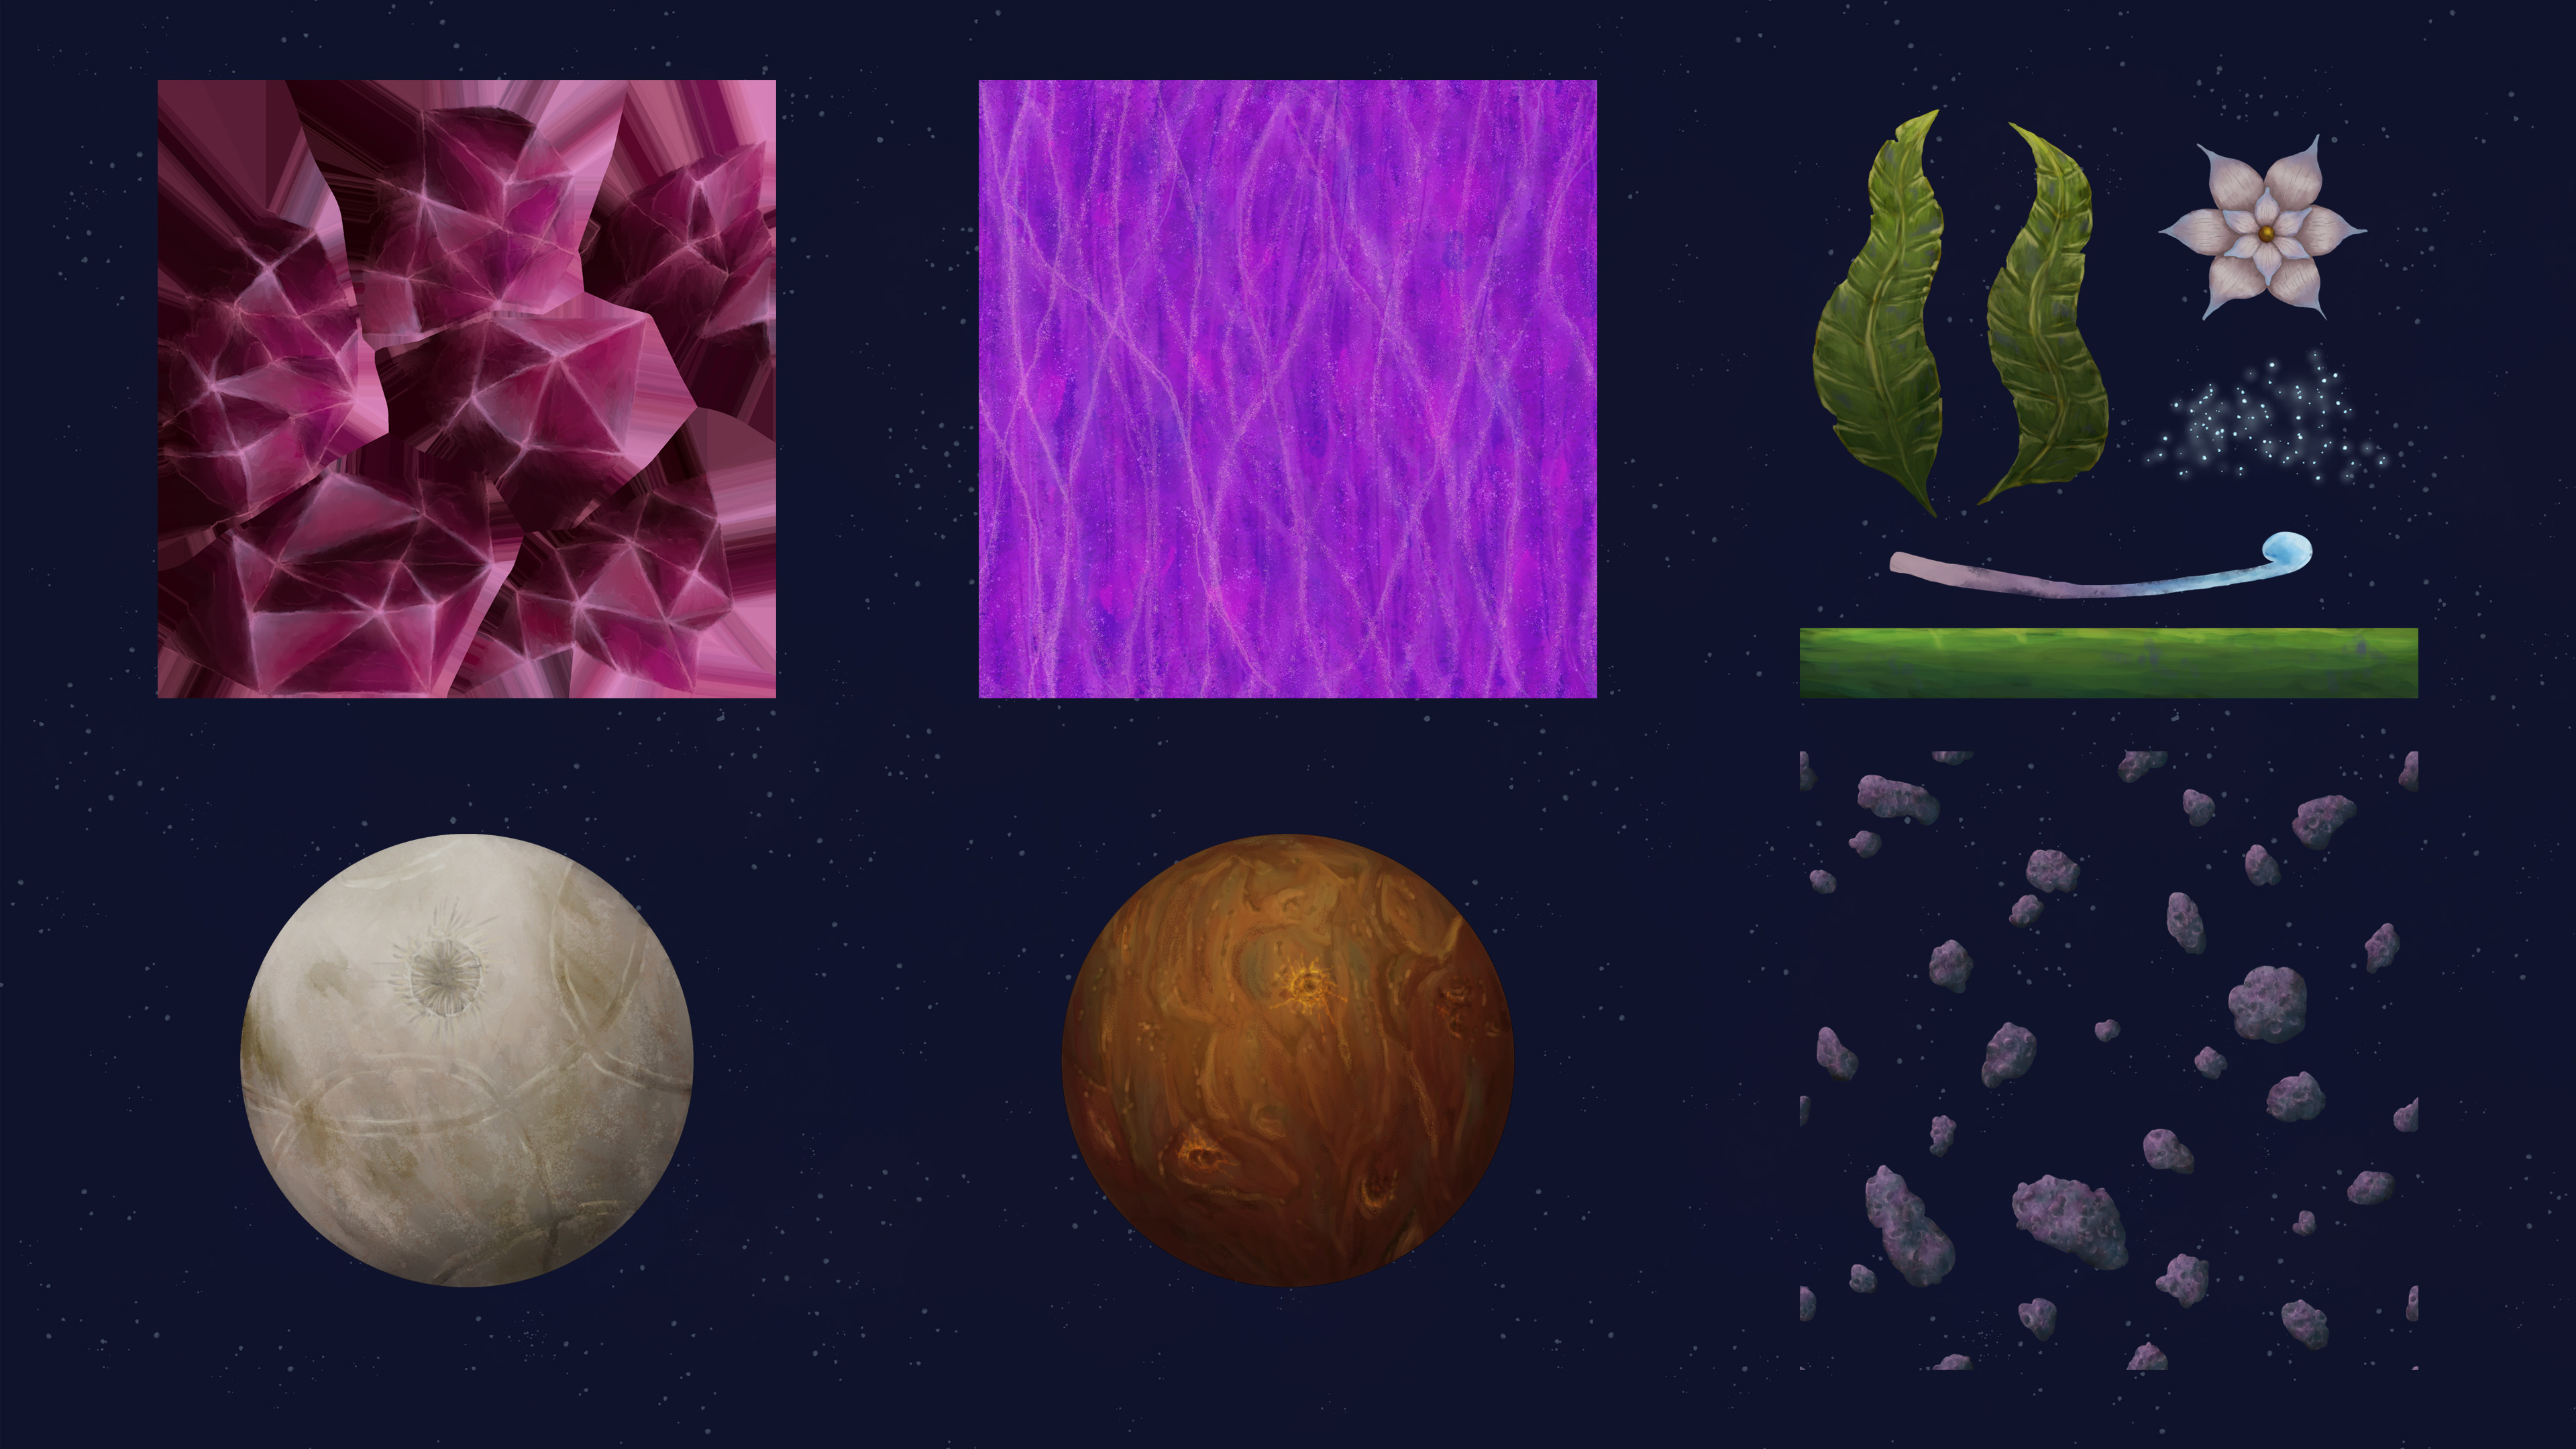 Crystals, visual effects, flowers and skybox textures